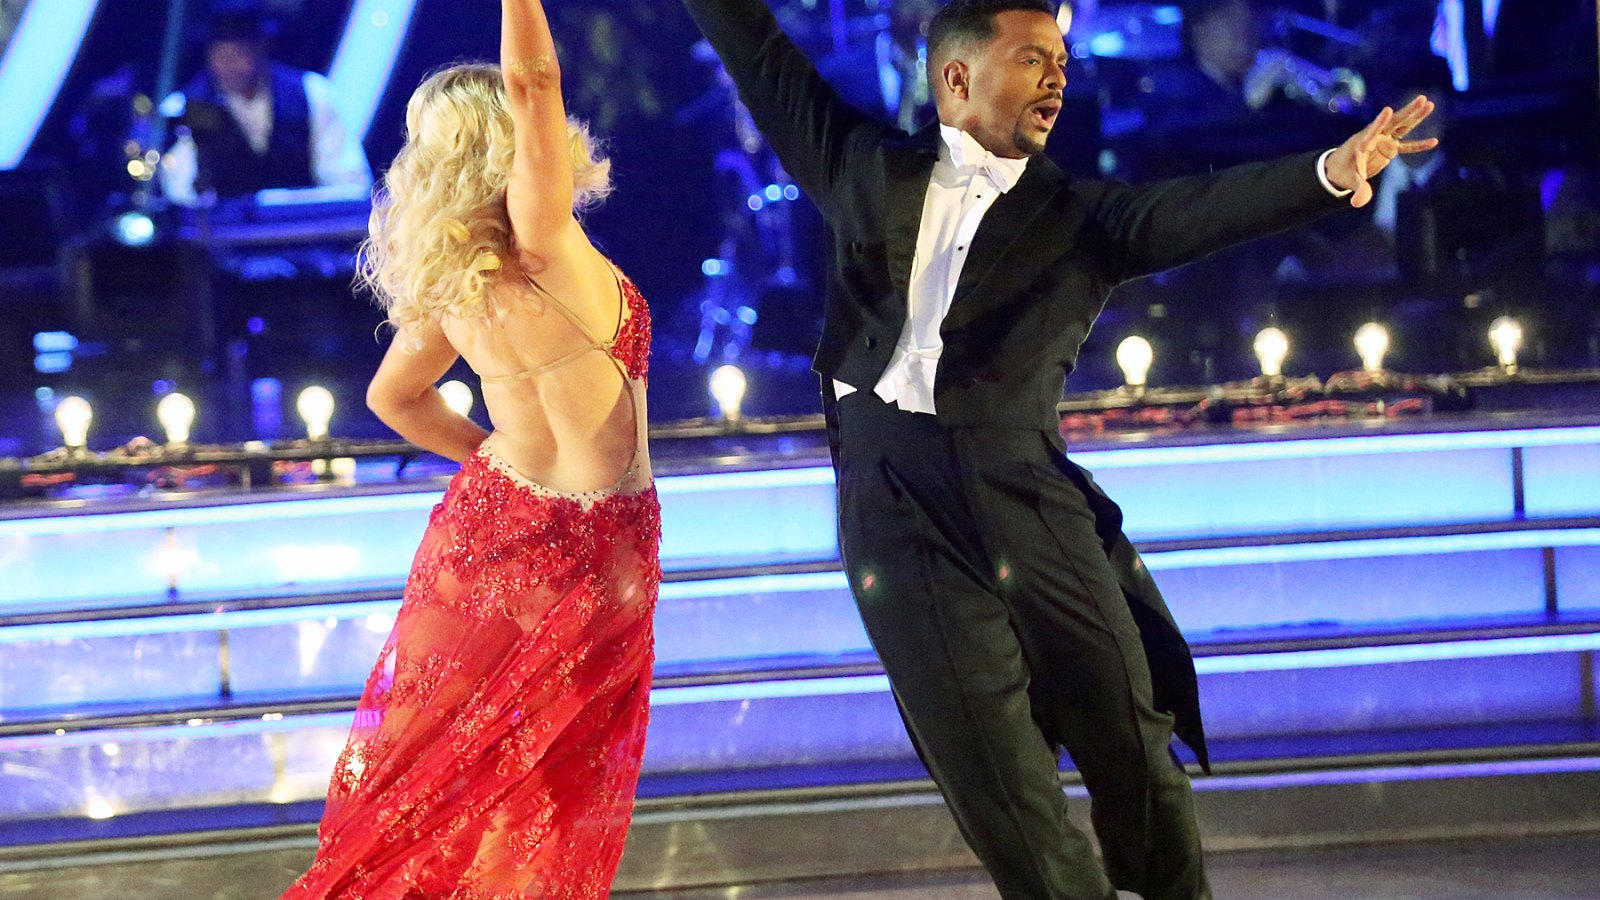 Witney Carson and Alfonso Ribeiro on Dancing With The Stars